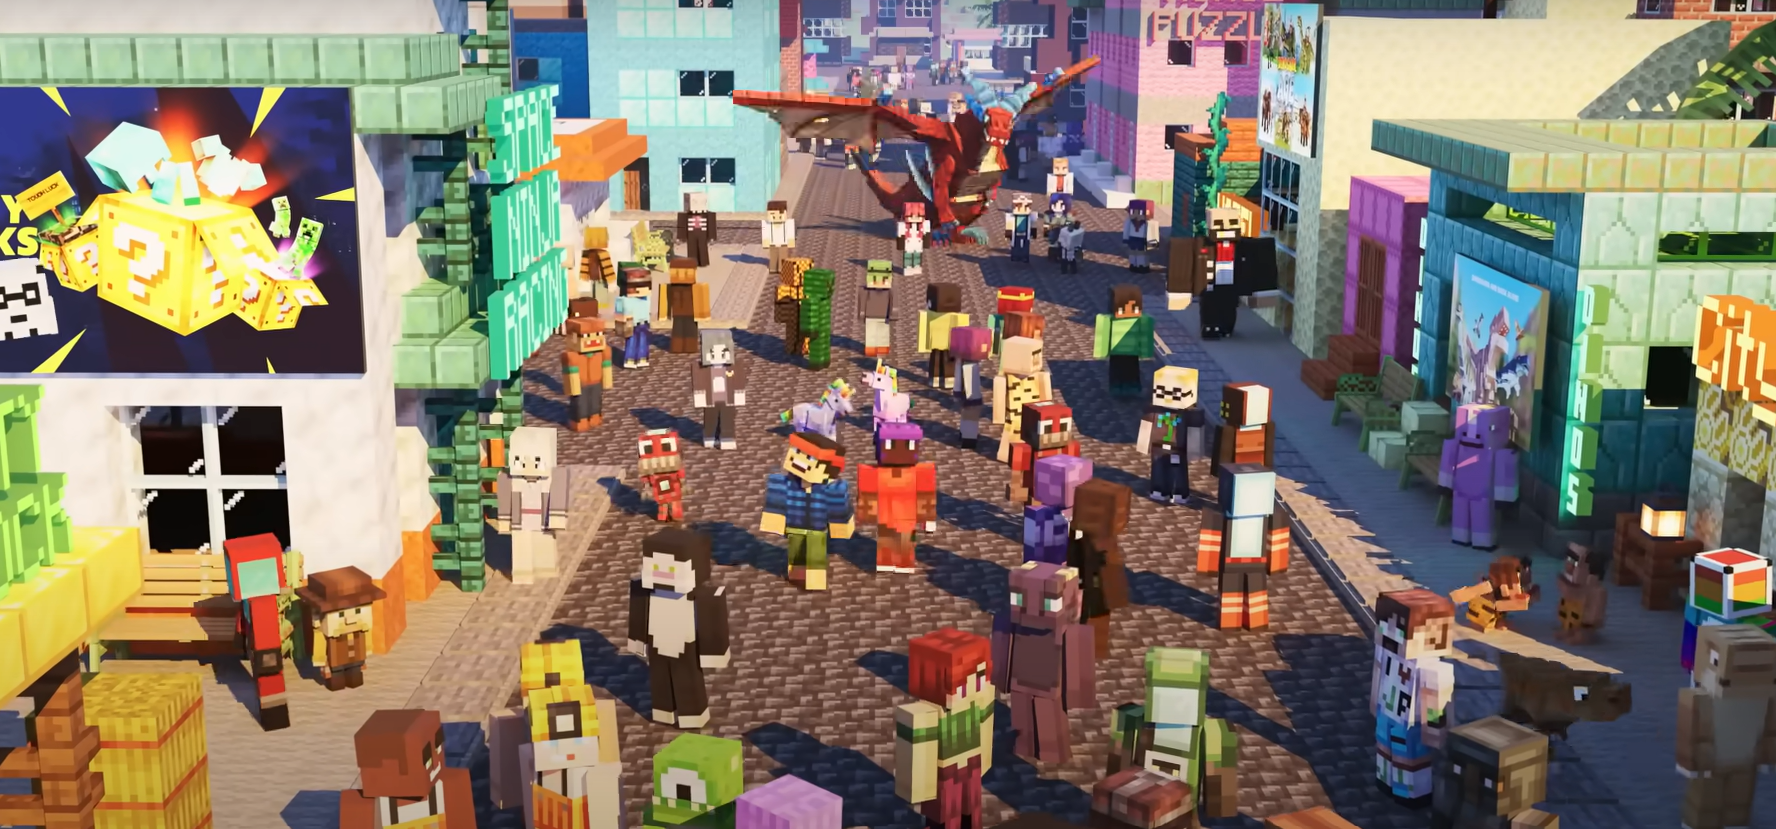 Minecraft: The block game says no to NFTs